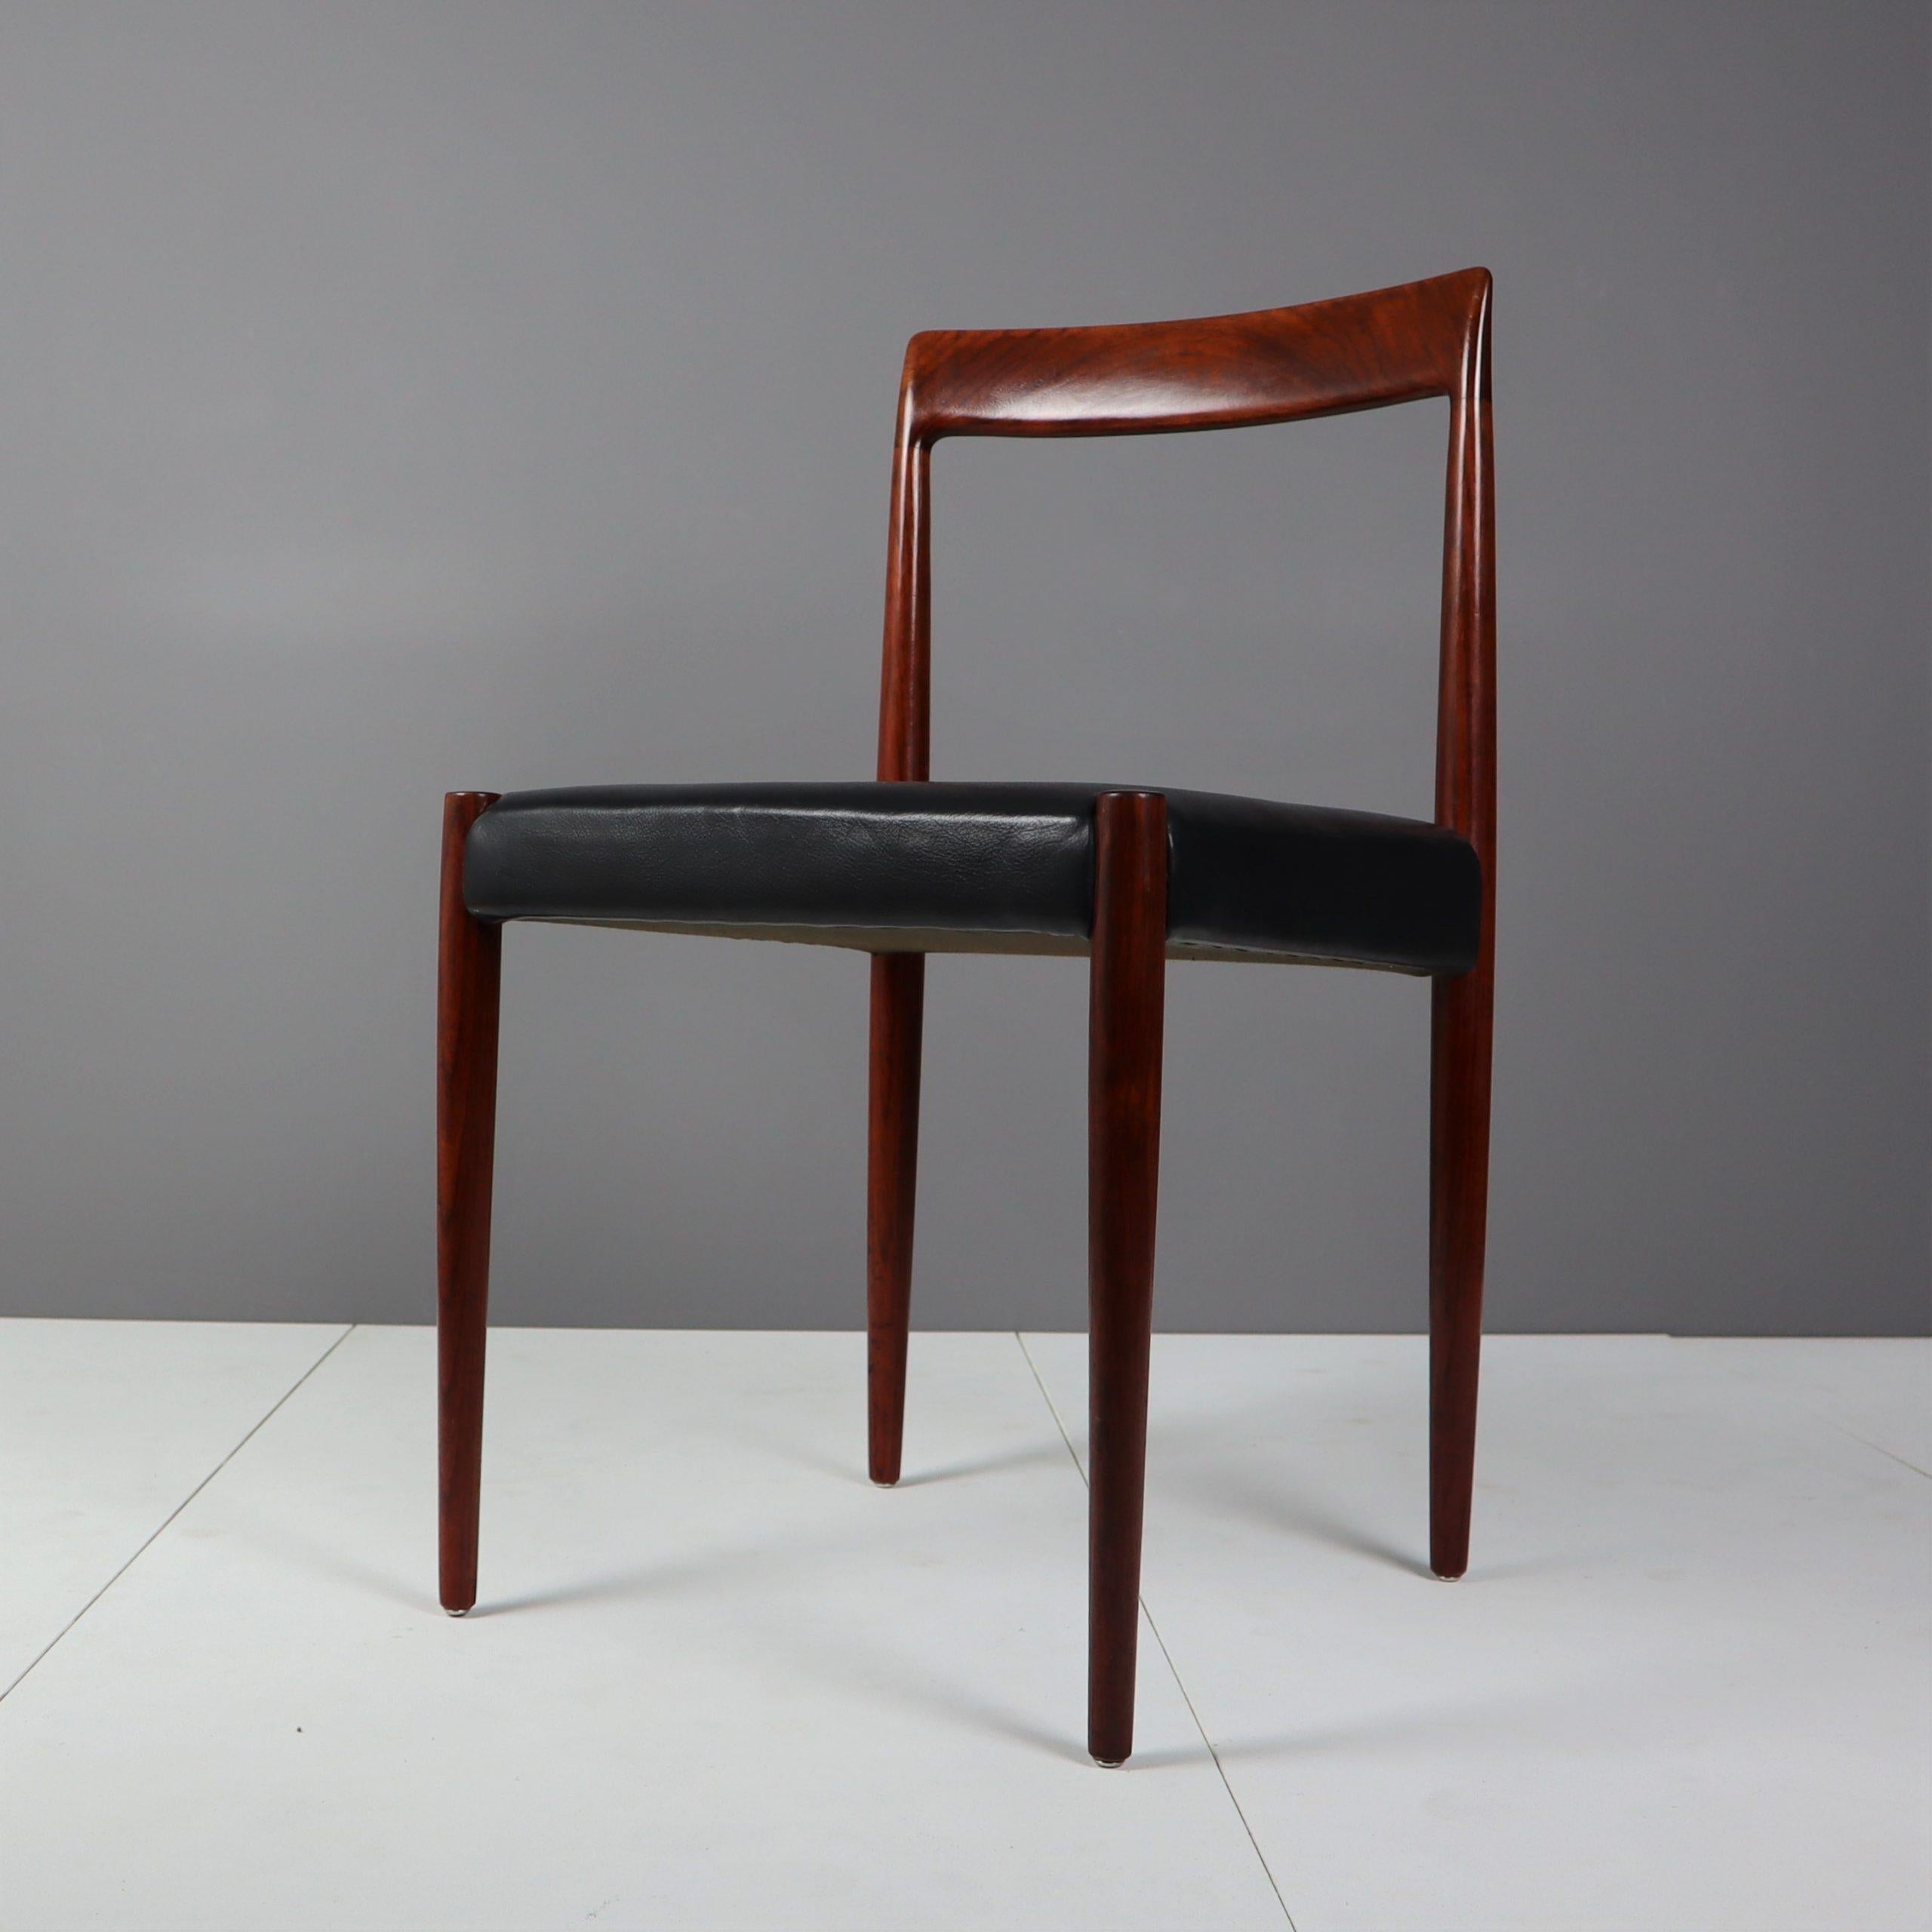 20th Century Midcentury Rosewood Chairs from Lübke For Sale